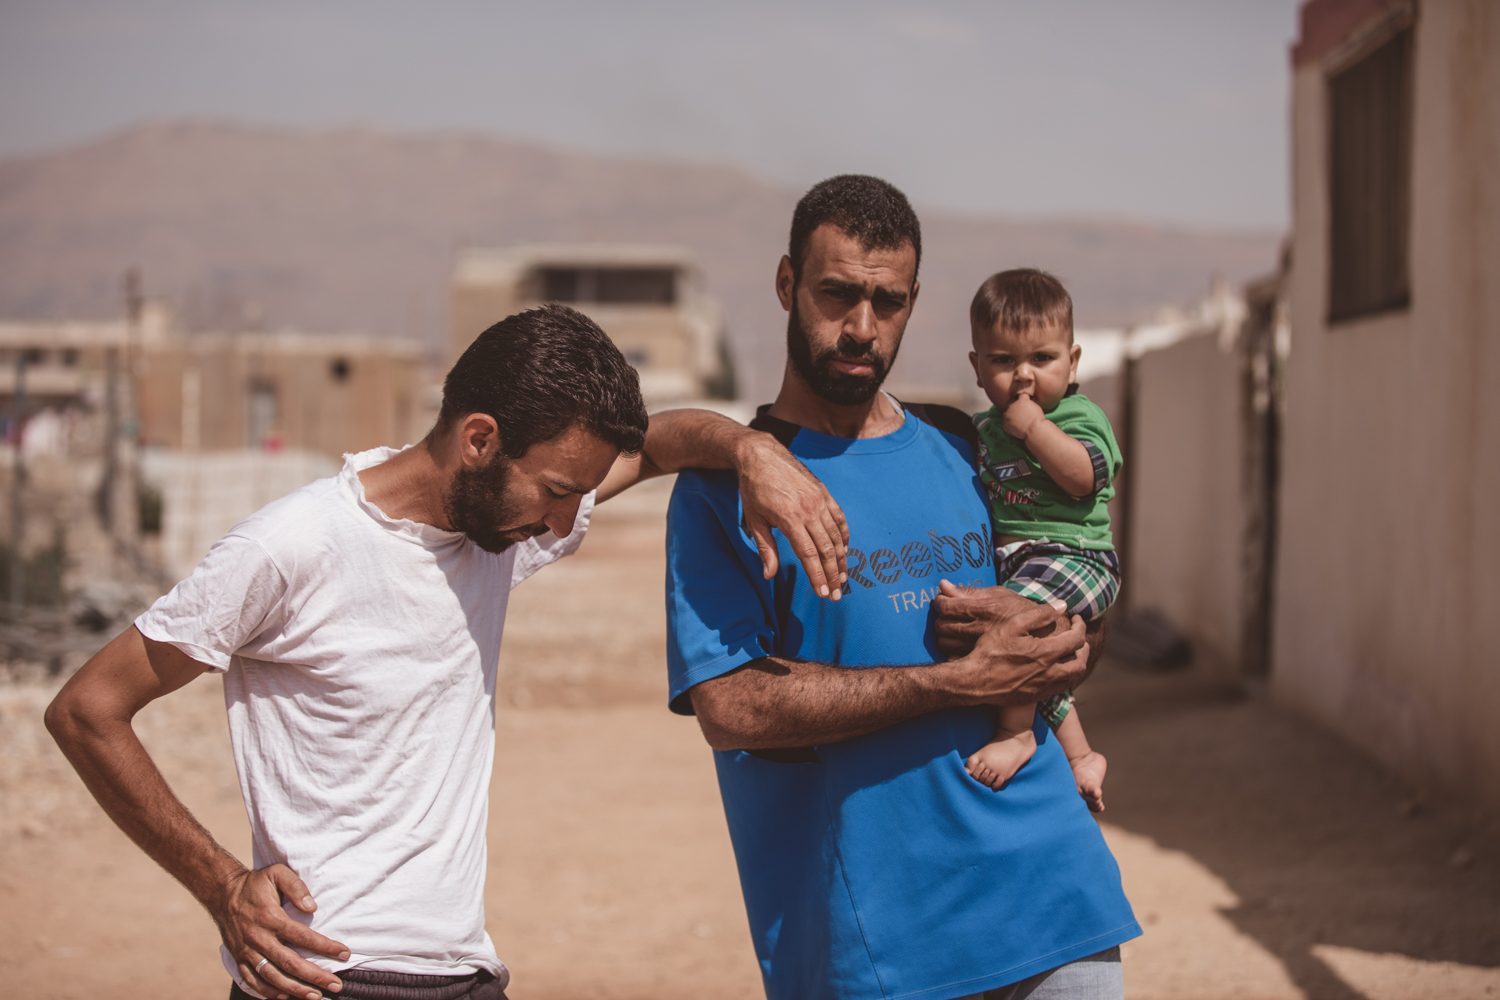  These two brother asked to remain anonymous for fear of repercussions. They escaped into Lebanon with a few family members, without even basic paperwork to prove their identities, and hope to return one day to help rebuild their homeland. 